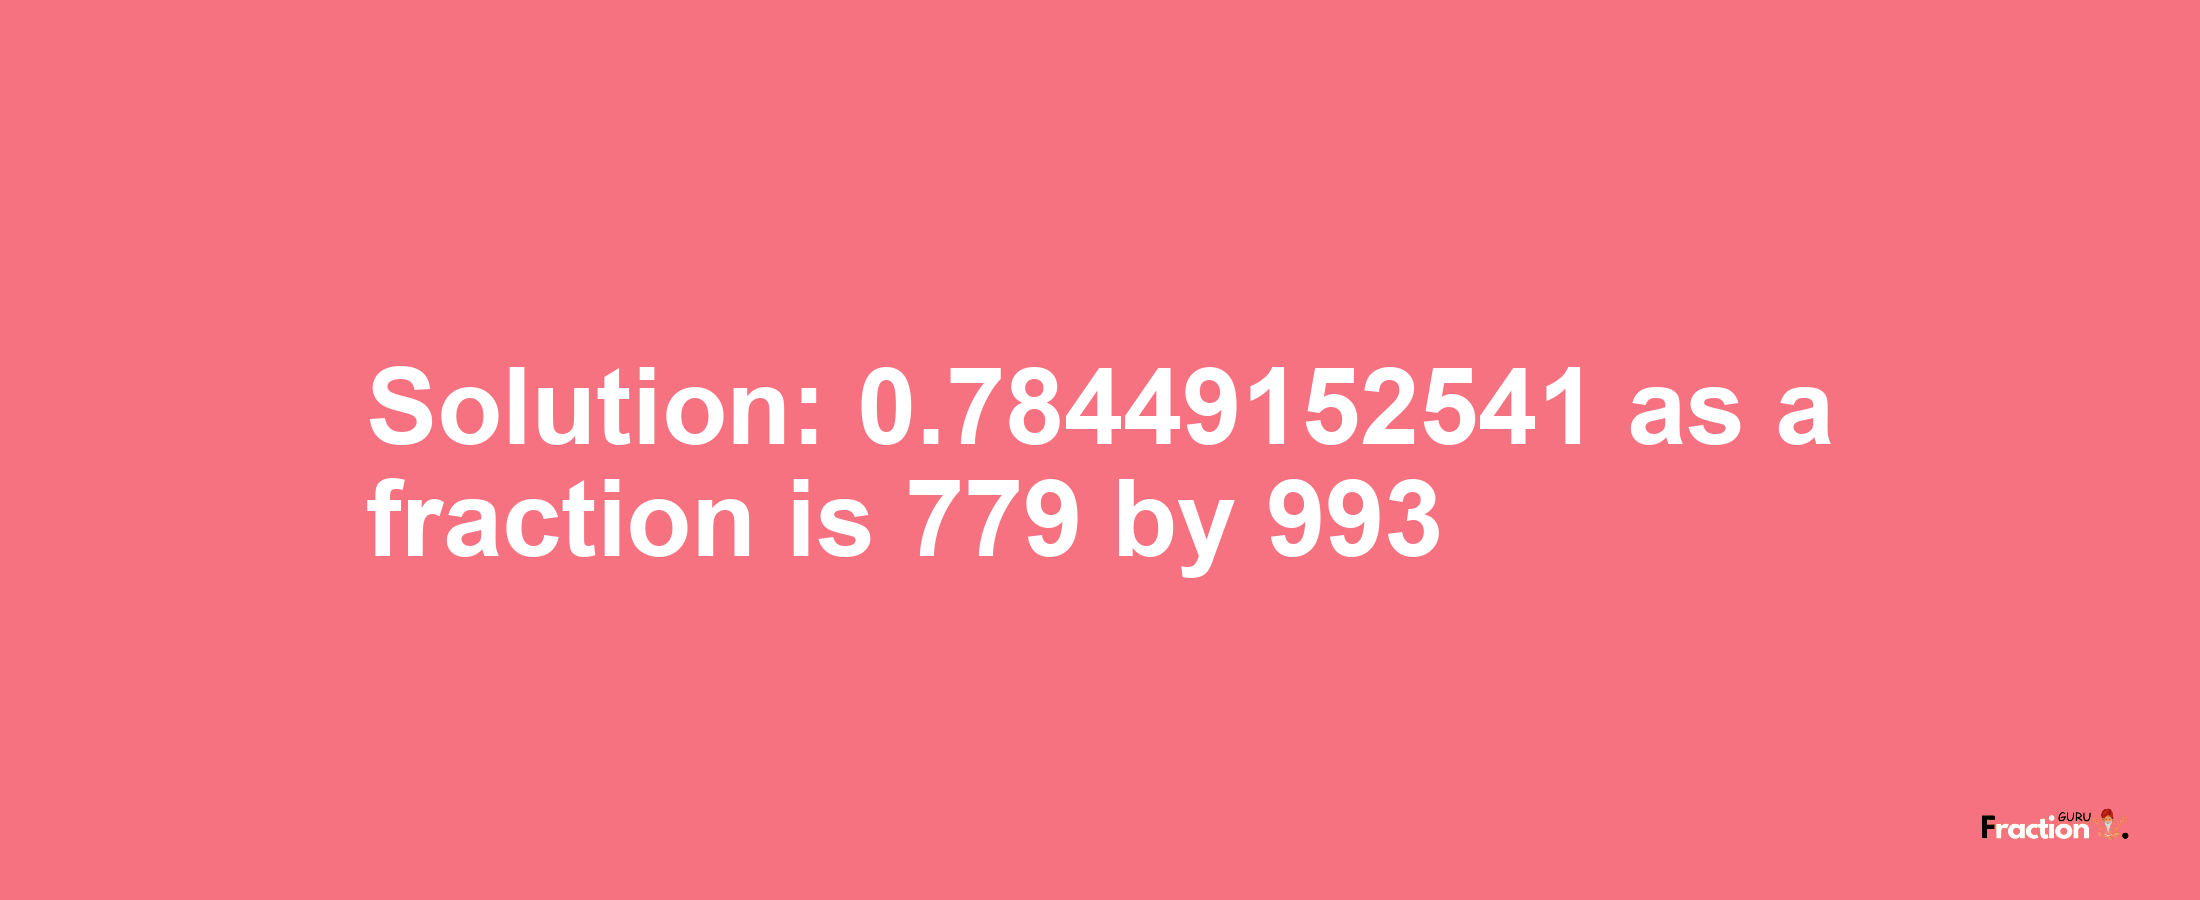 Solution:0.78449152541 as a fraction is 779/993